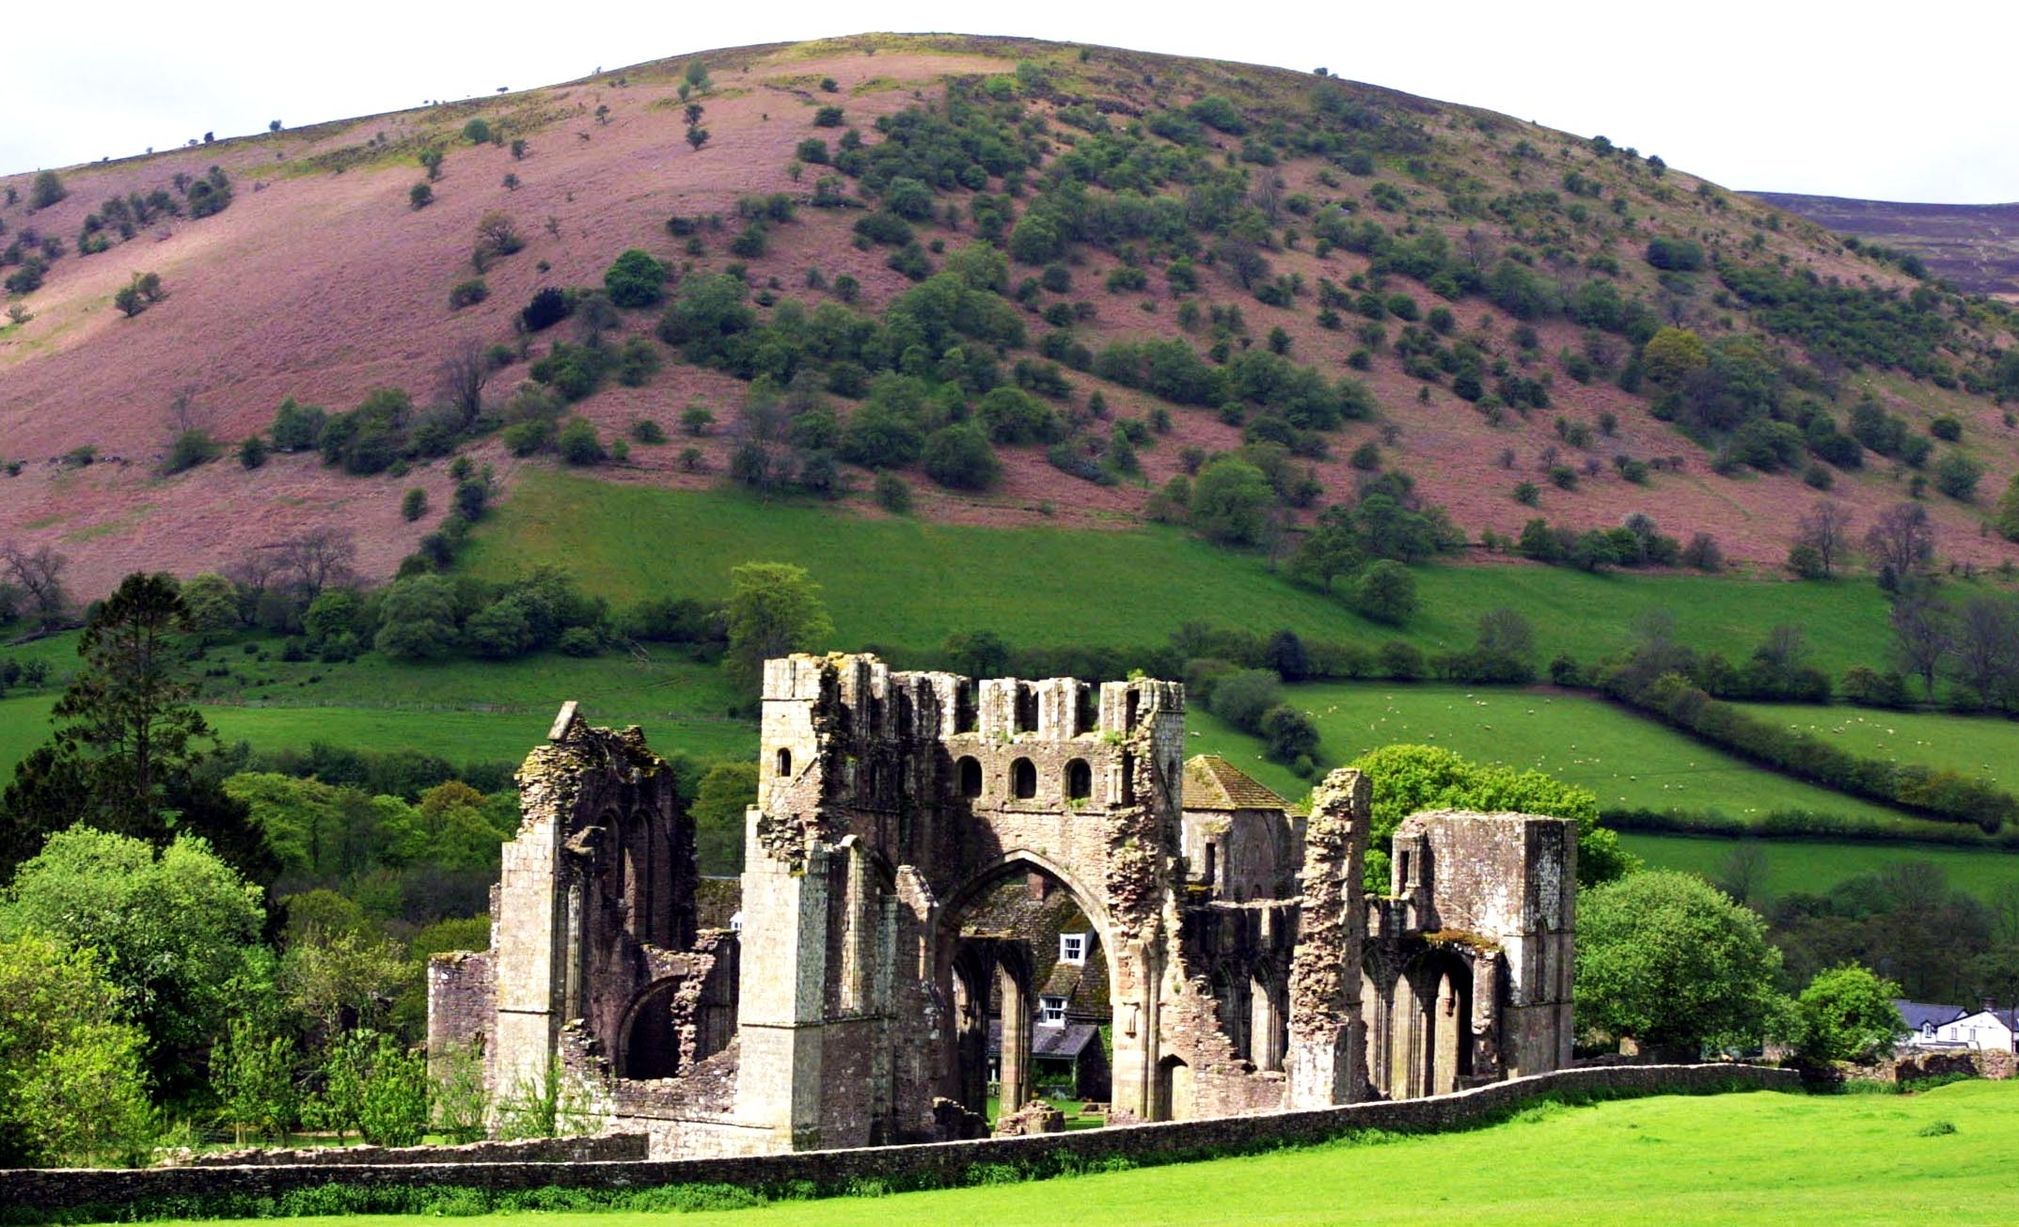 23 Dating Ideas With Breathtaking Scenery in Wales